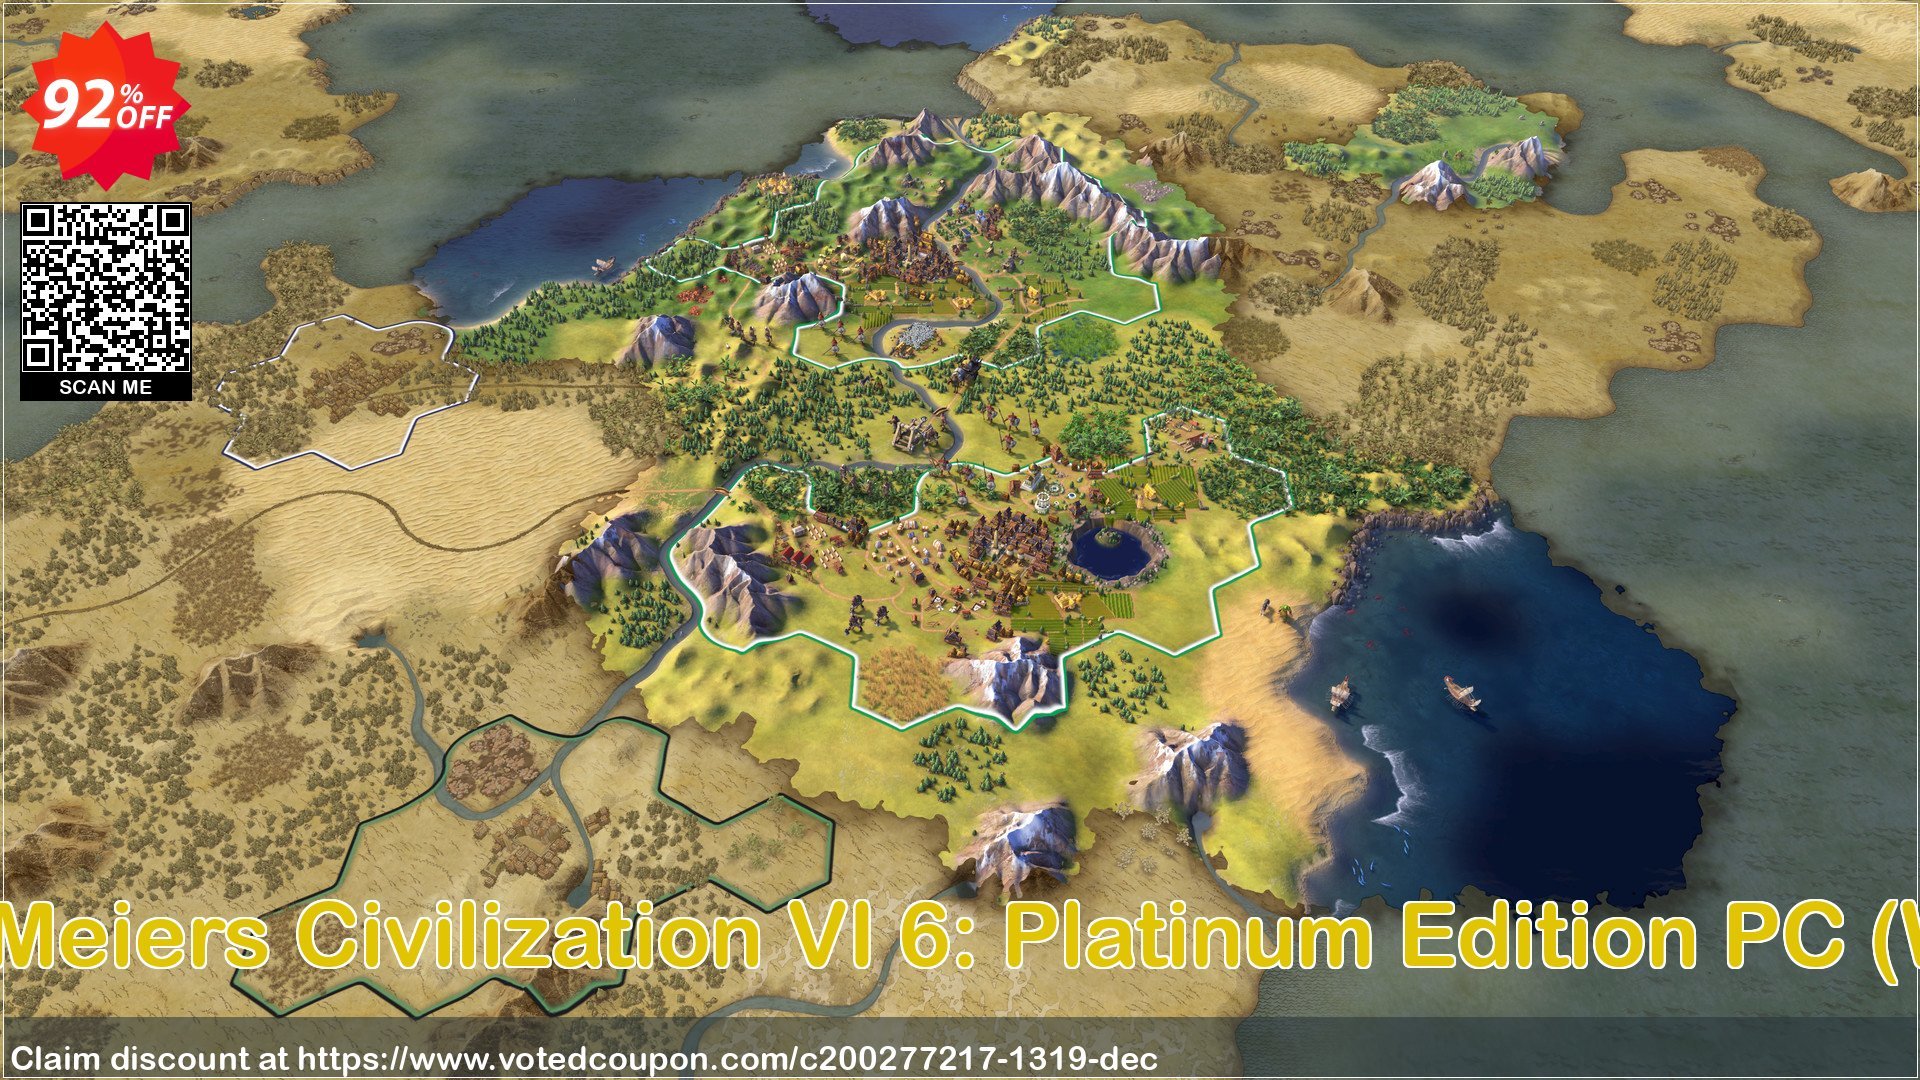 Sid Meiers Civilization VI 6: Platinum Edition PC, WW  Coupon Code May 2024, 92% OFF - VotedCoupon